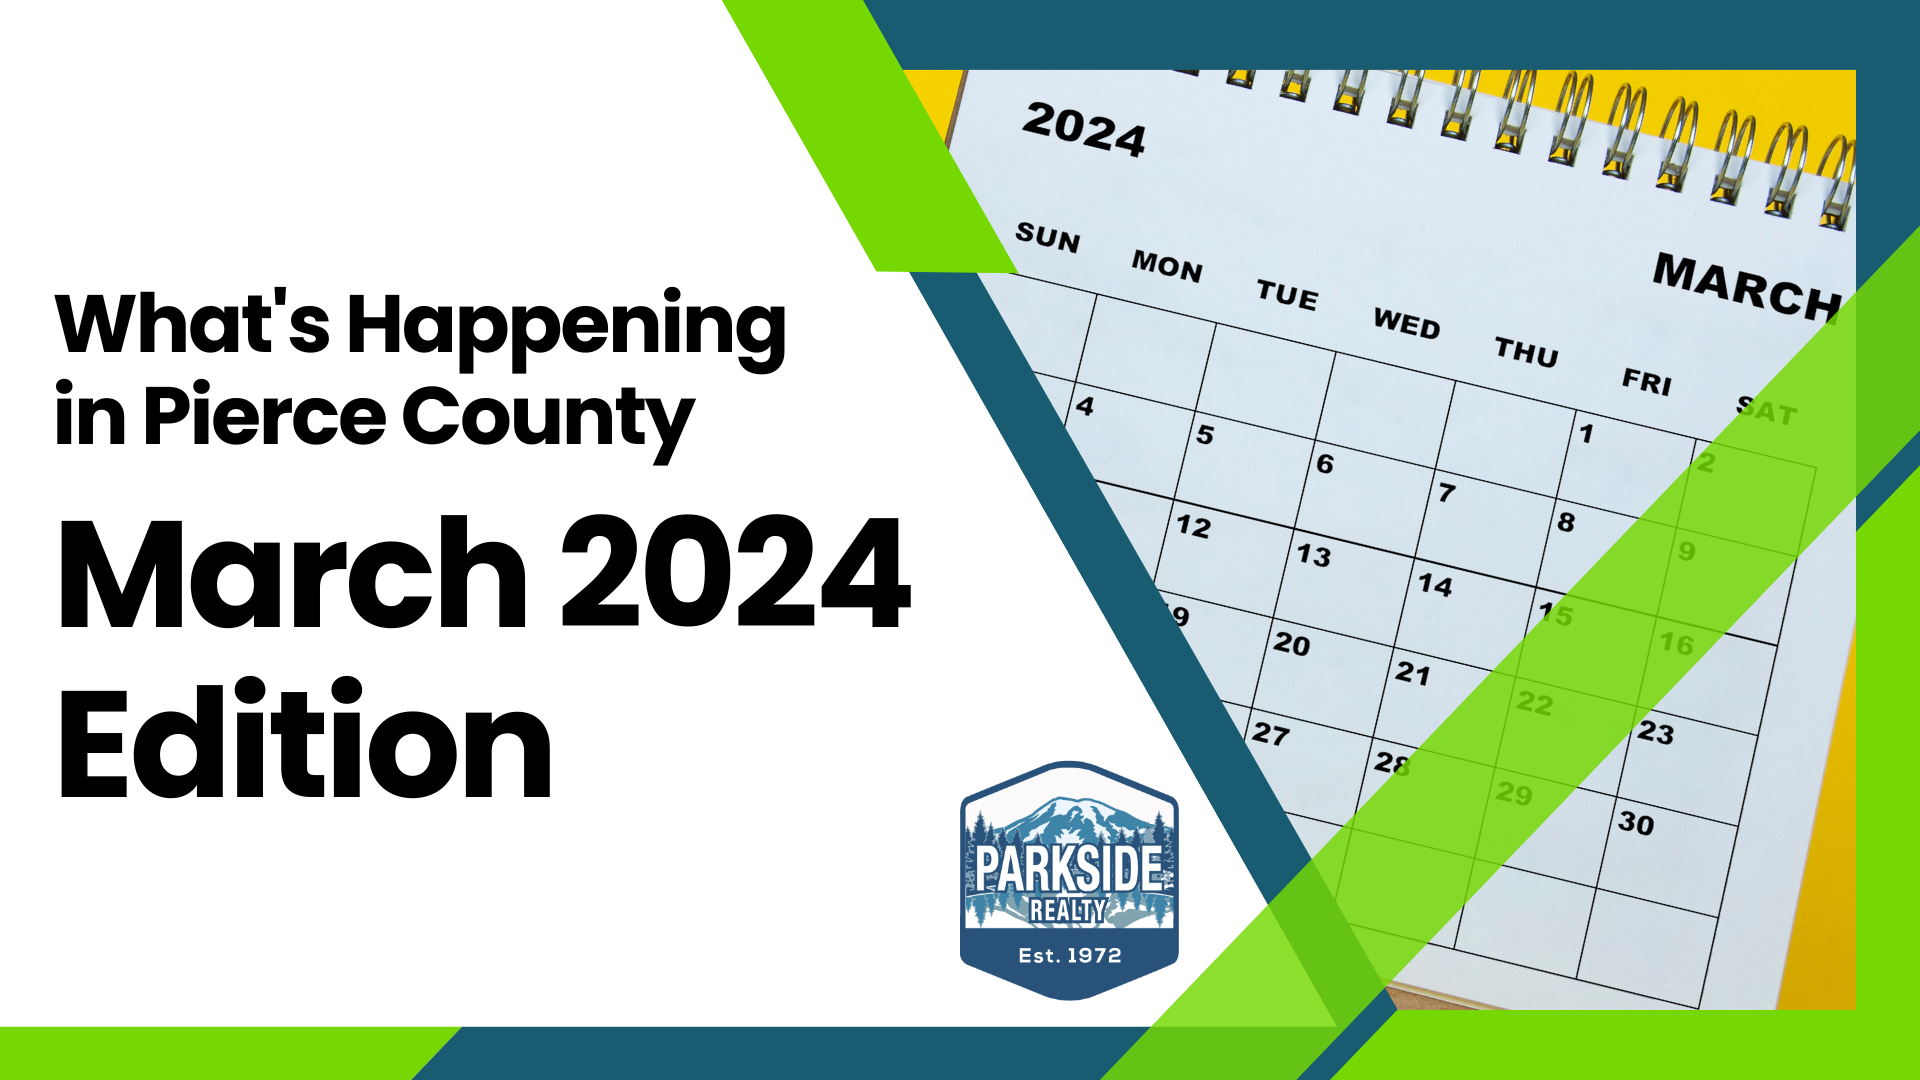 What’s Happening in Pierce County: March 2024 Edition